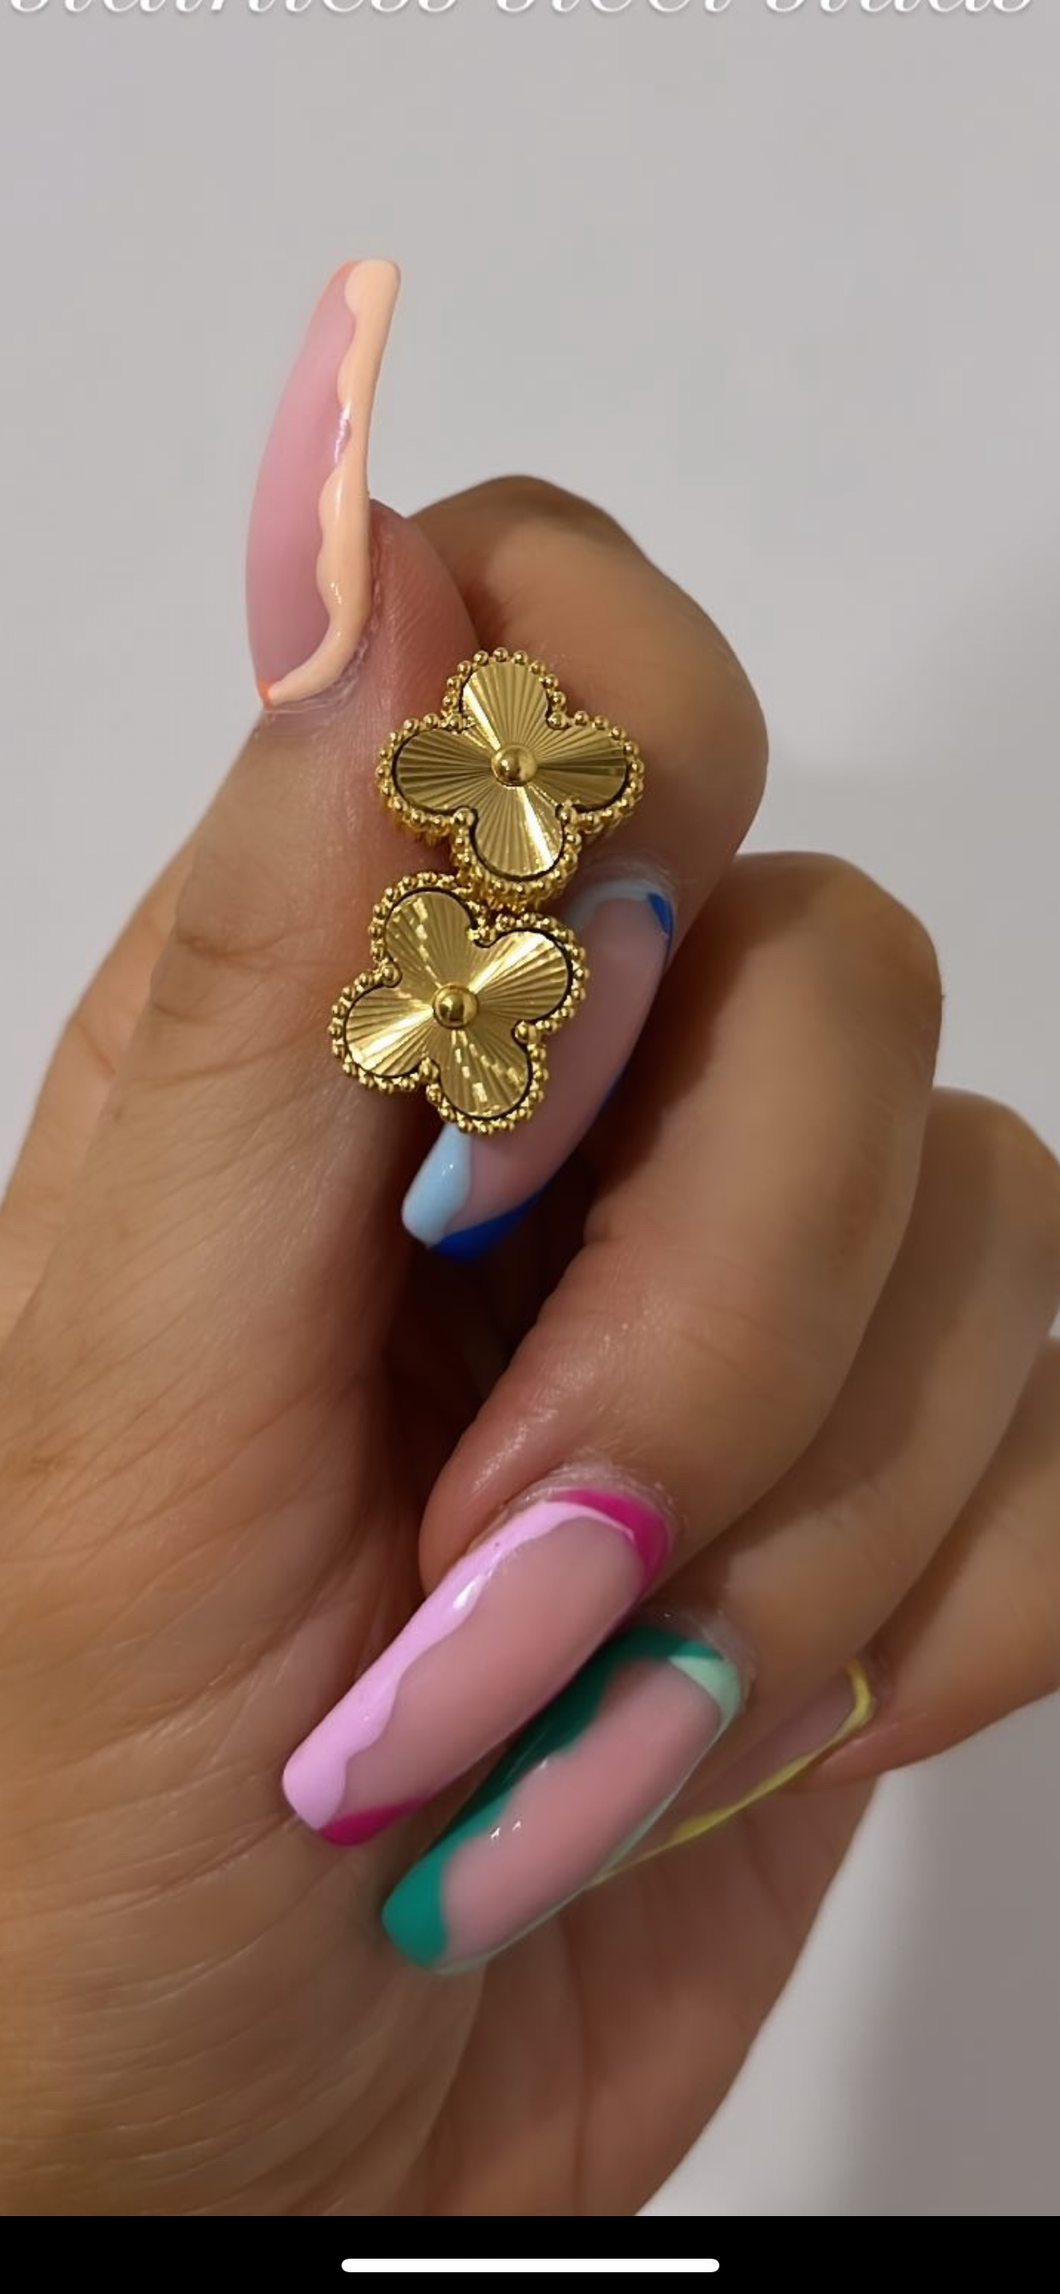 The Clover studs